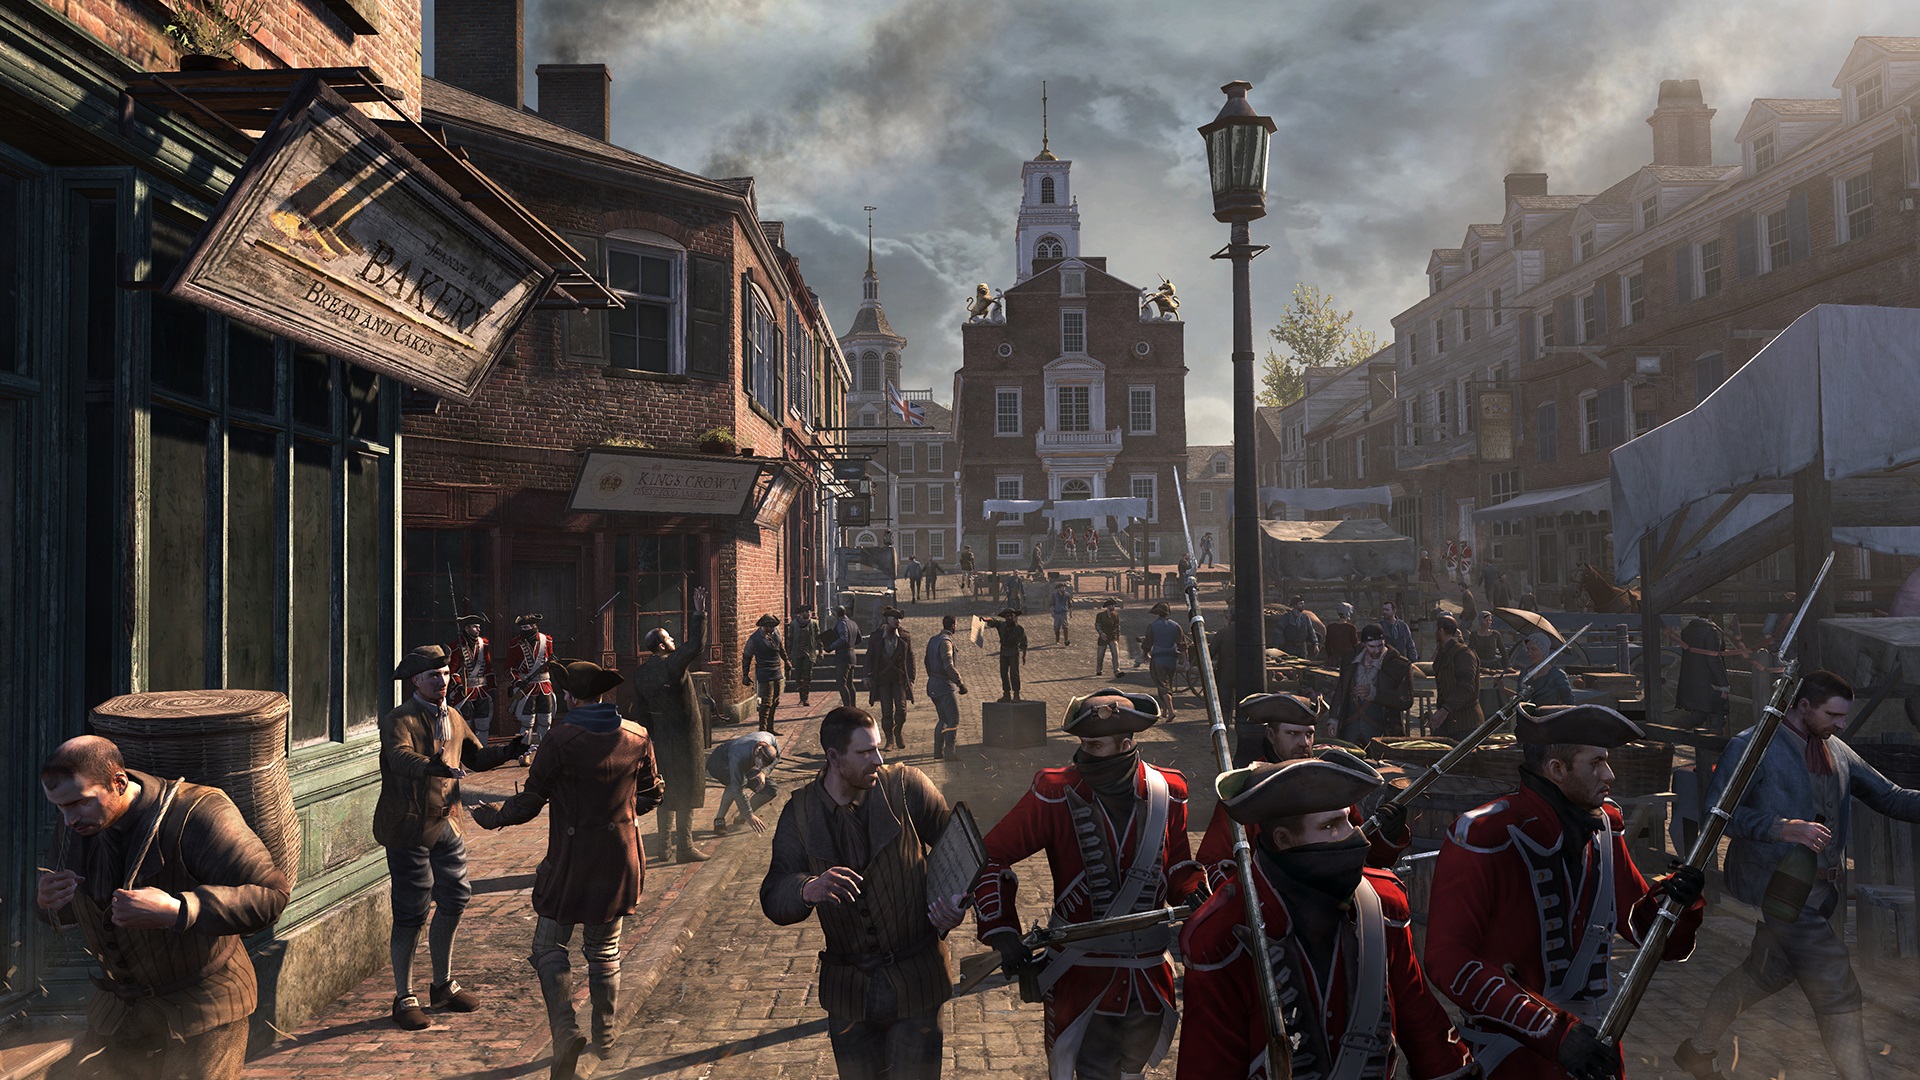 Assassin's Creed III Pics, Video Game Collection